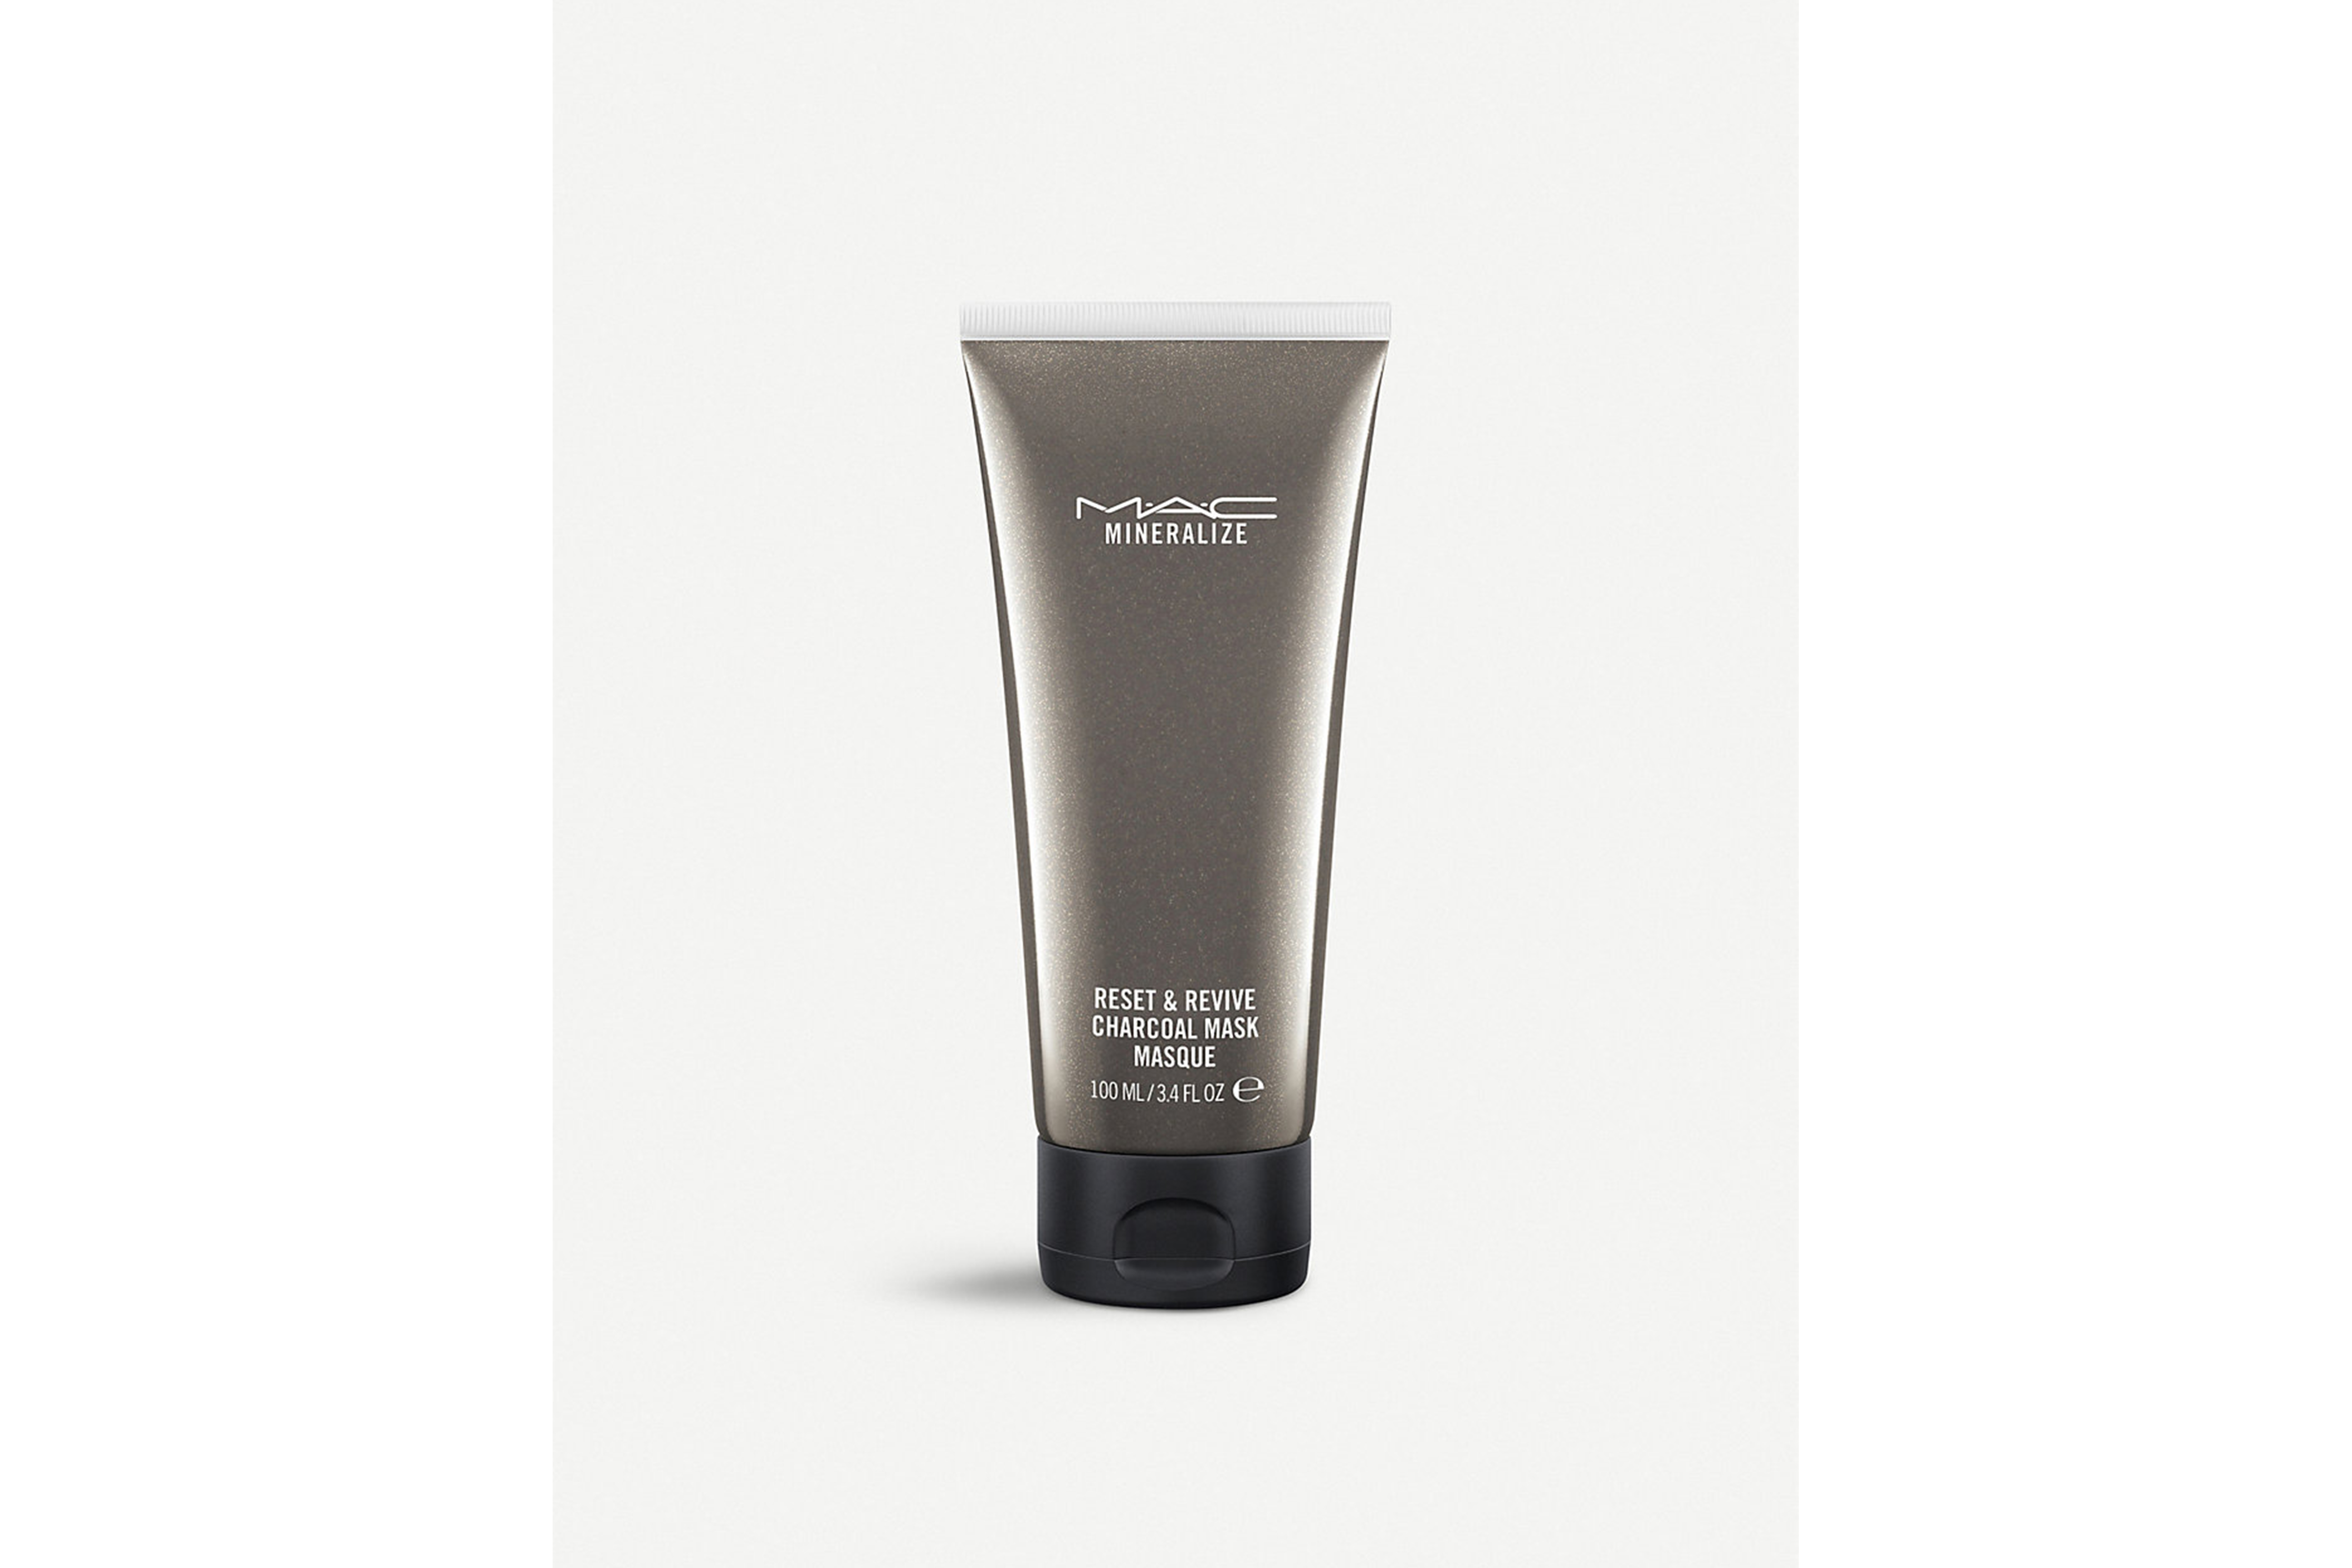 mac MINERALIZE RESET & REVIVE CHARCOAL MASK